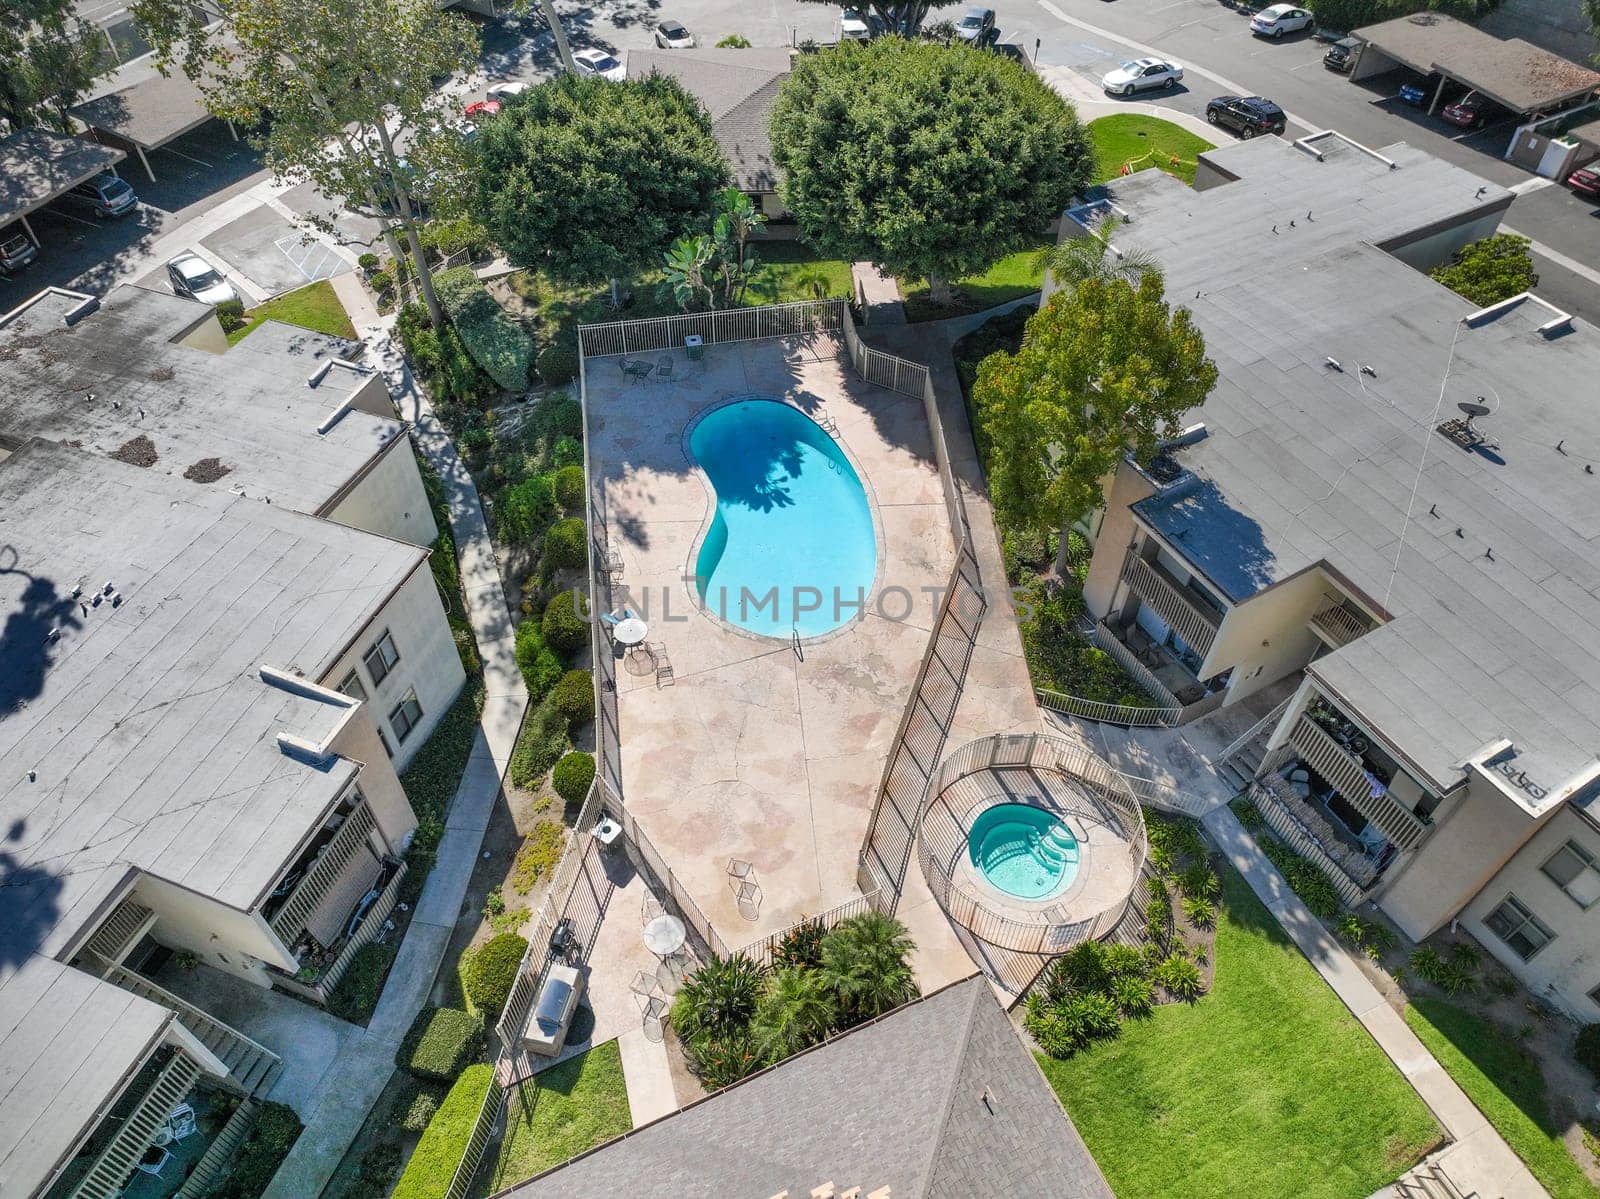 Gardens with pool and Jacuzzi in a the typical apartment complex building in San Diego, California by Bonandbon